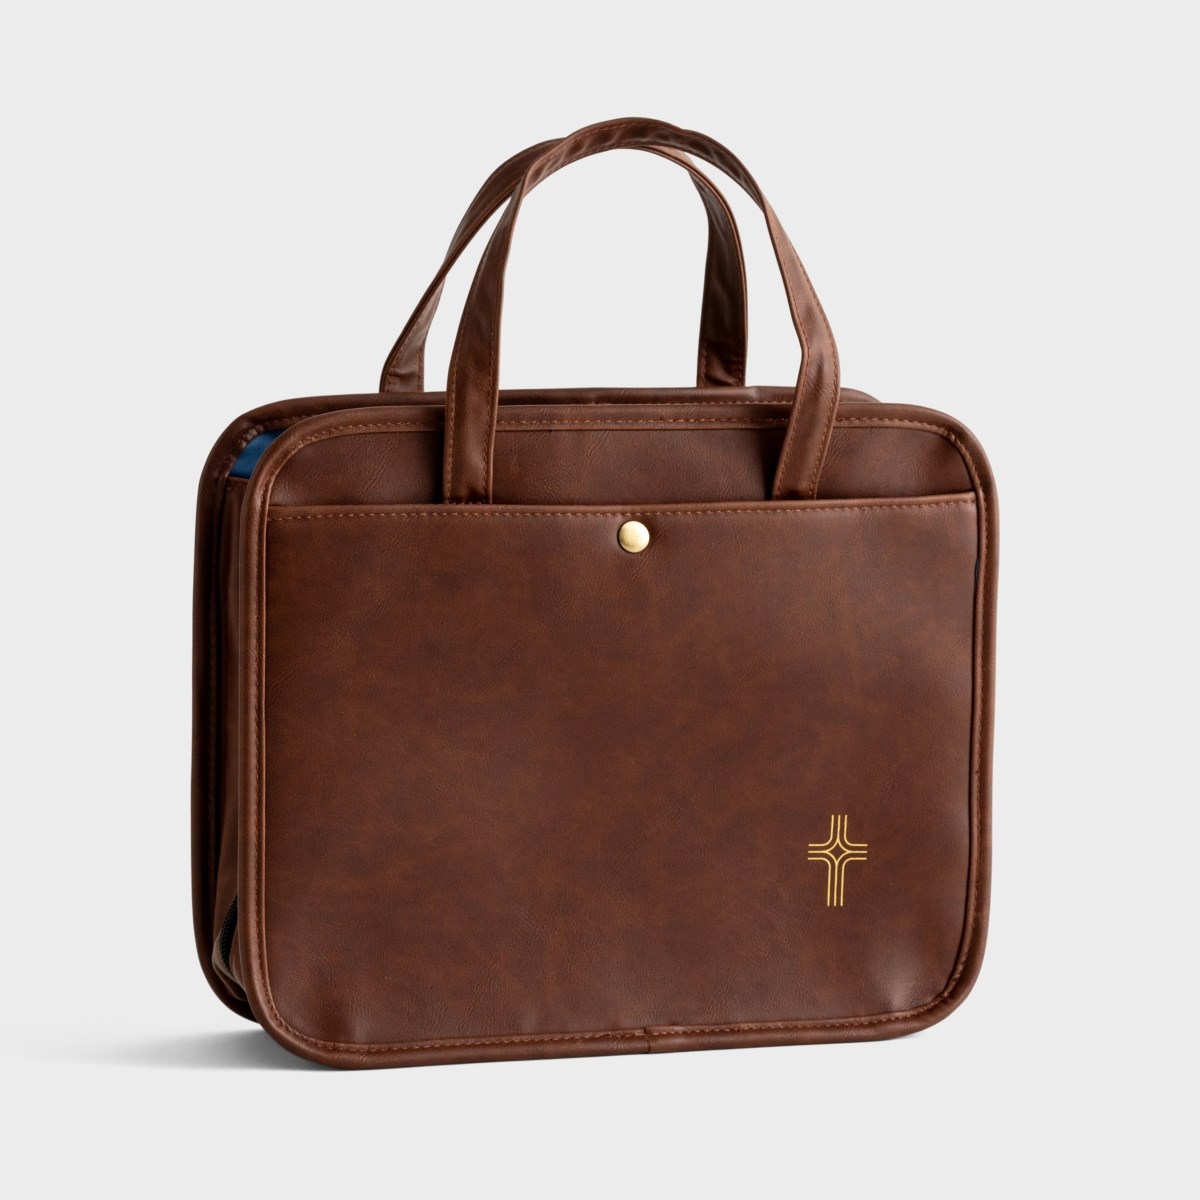 Gold Cross - Faux Leather Bible Tote and Organizational Bag